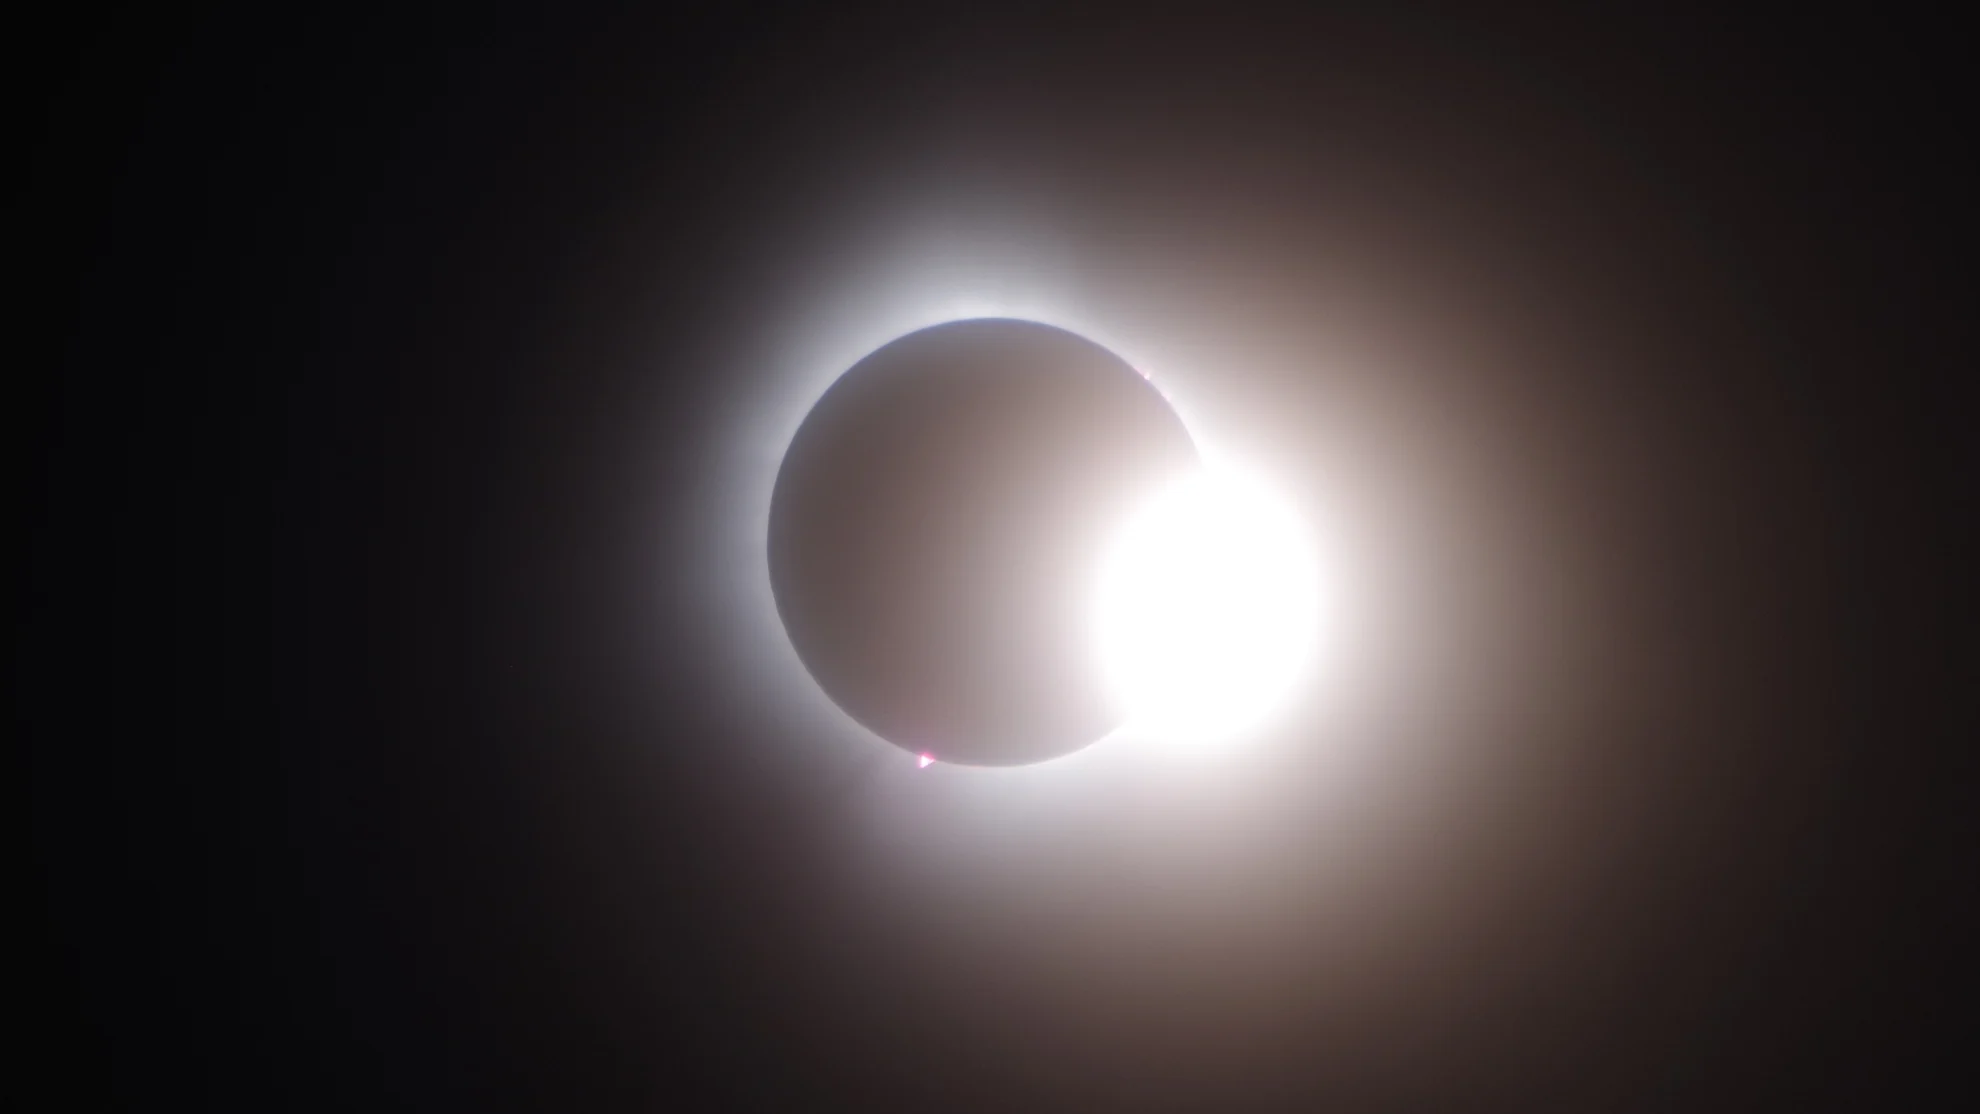 Was that a solar flare? What did we see during the April 8 total solar eclipse?